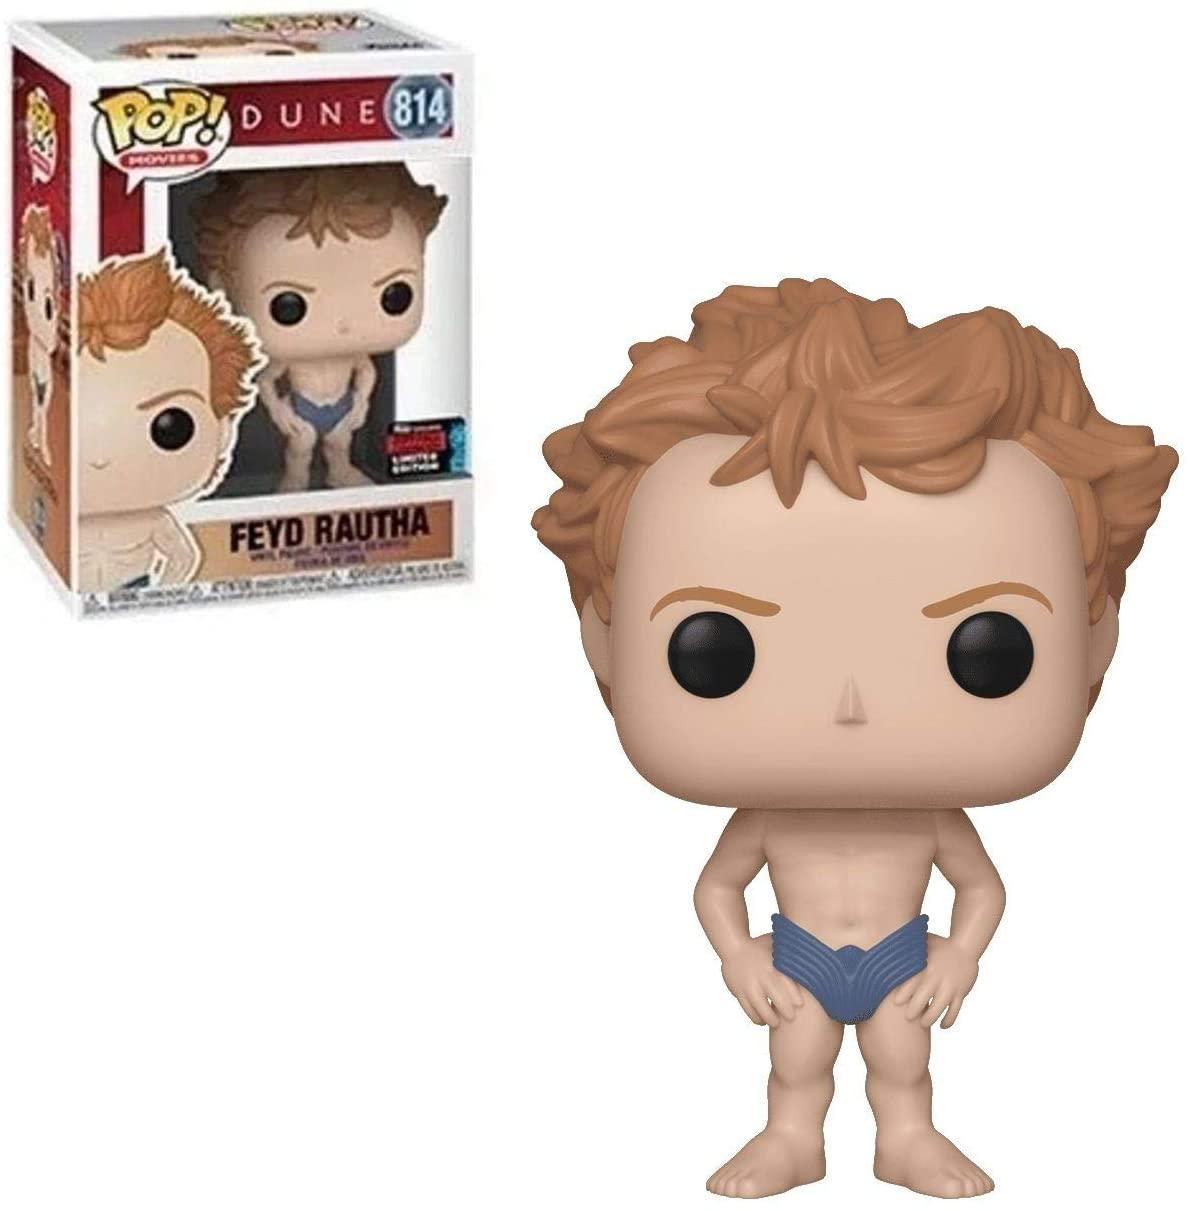 Funko POP!-Dune Classic Feyd Rautha 2019 Excl - The Card Vault